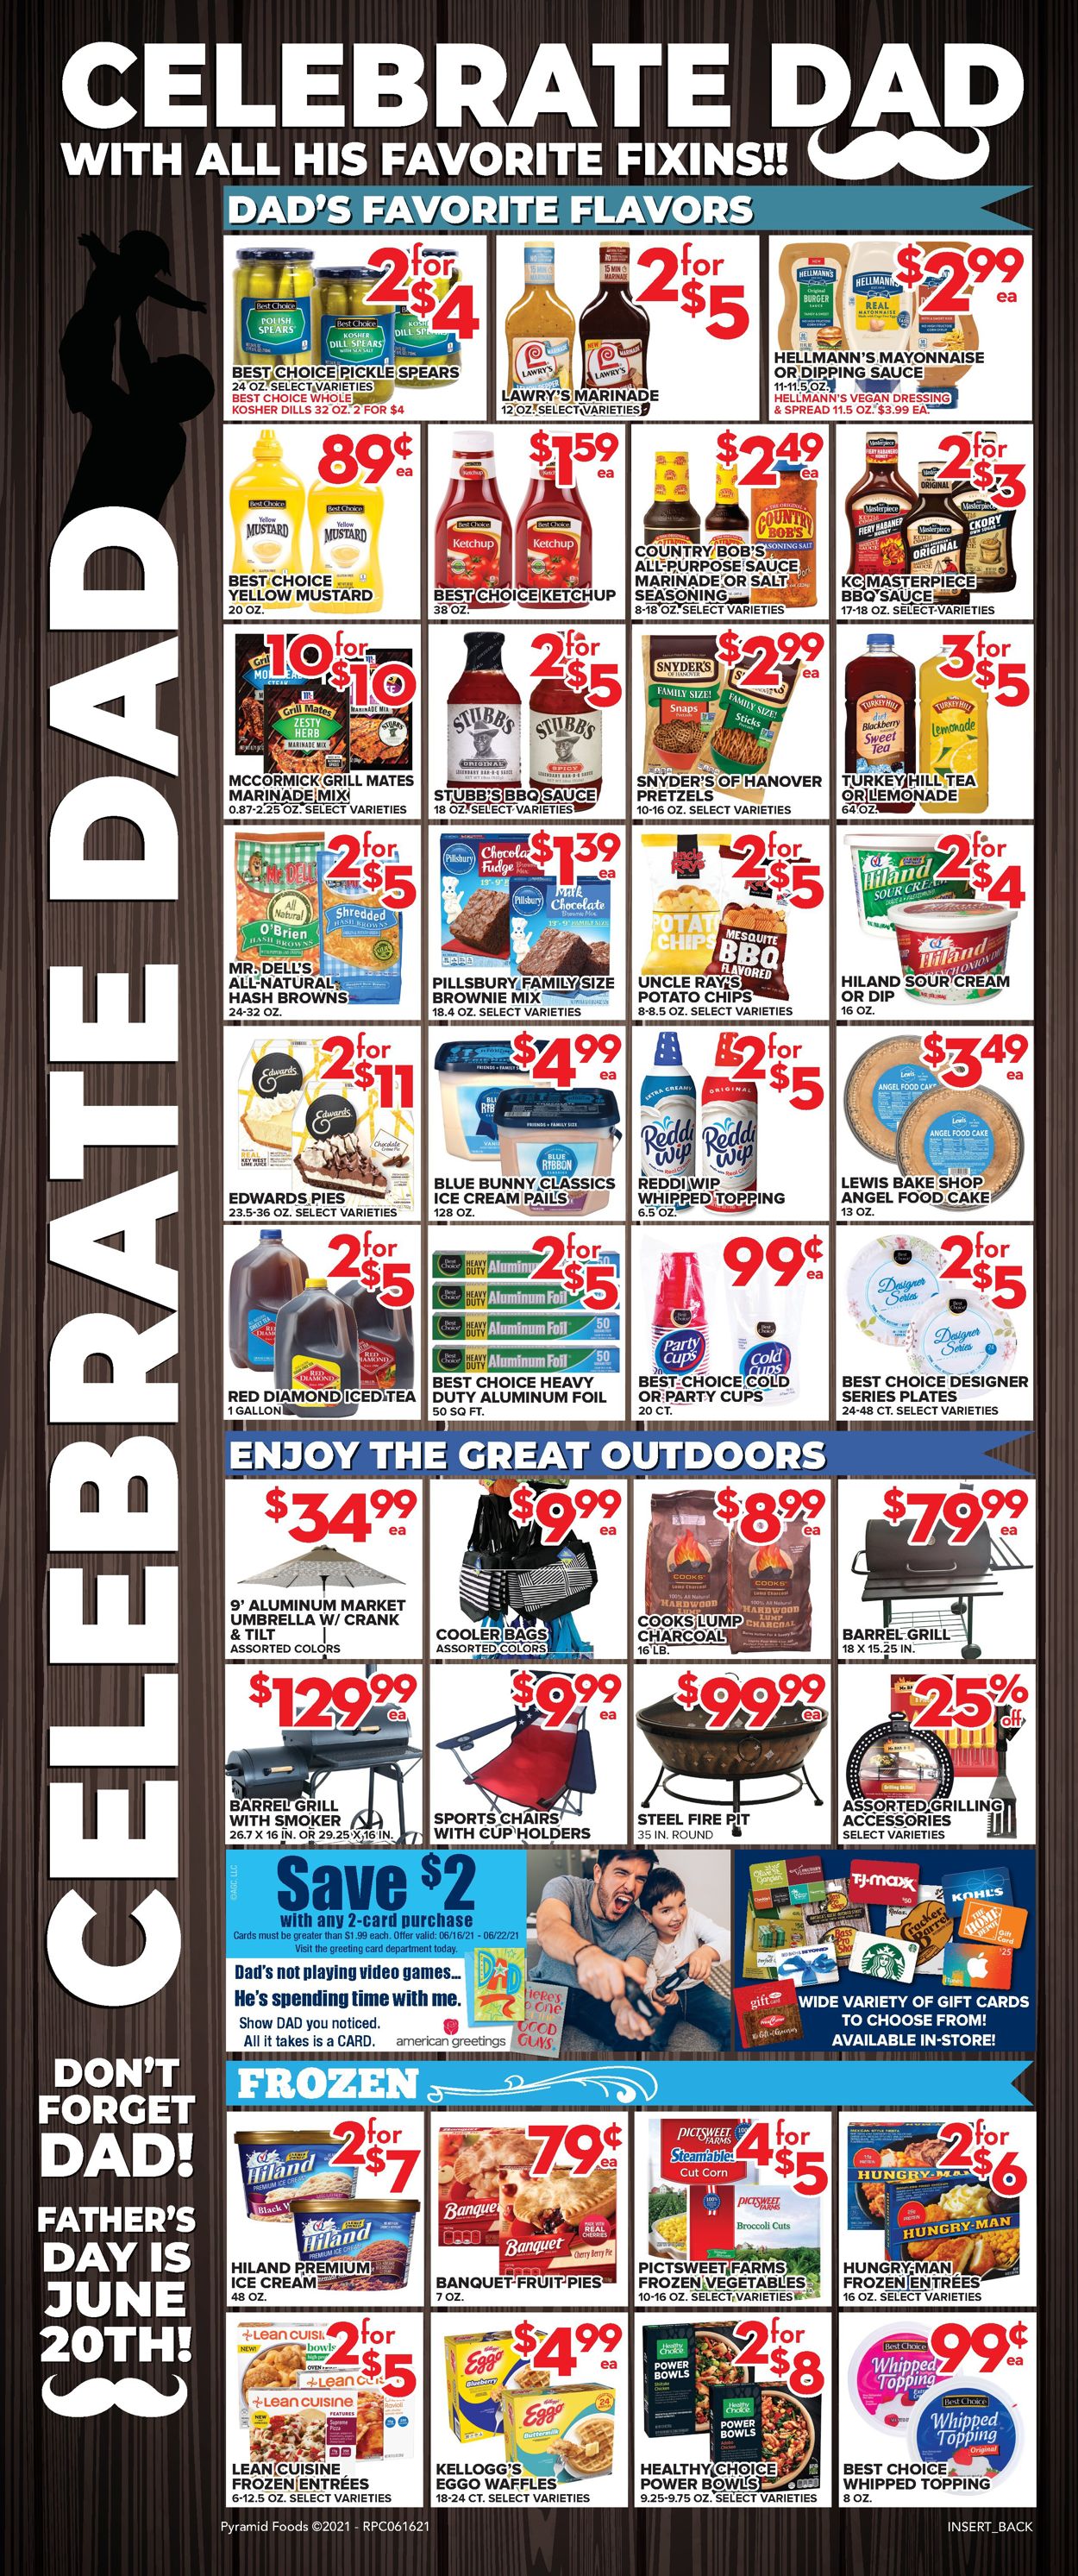 Price Cutter Weekly Ad Circular - valid 06/16-06/22/2021 (Page 6)